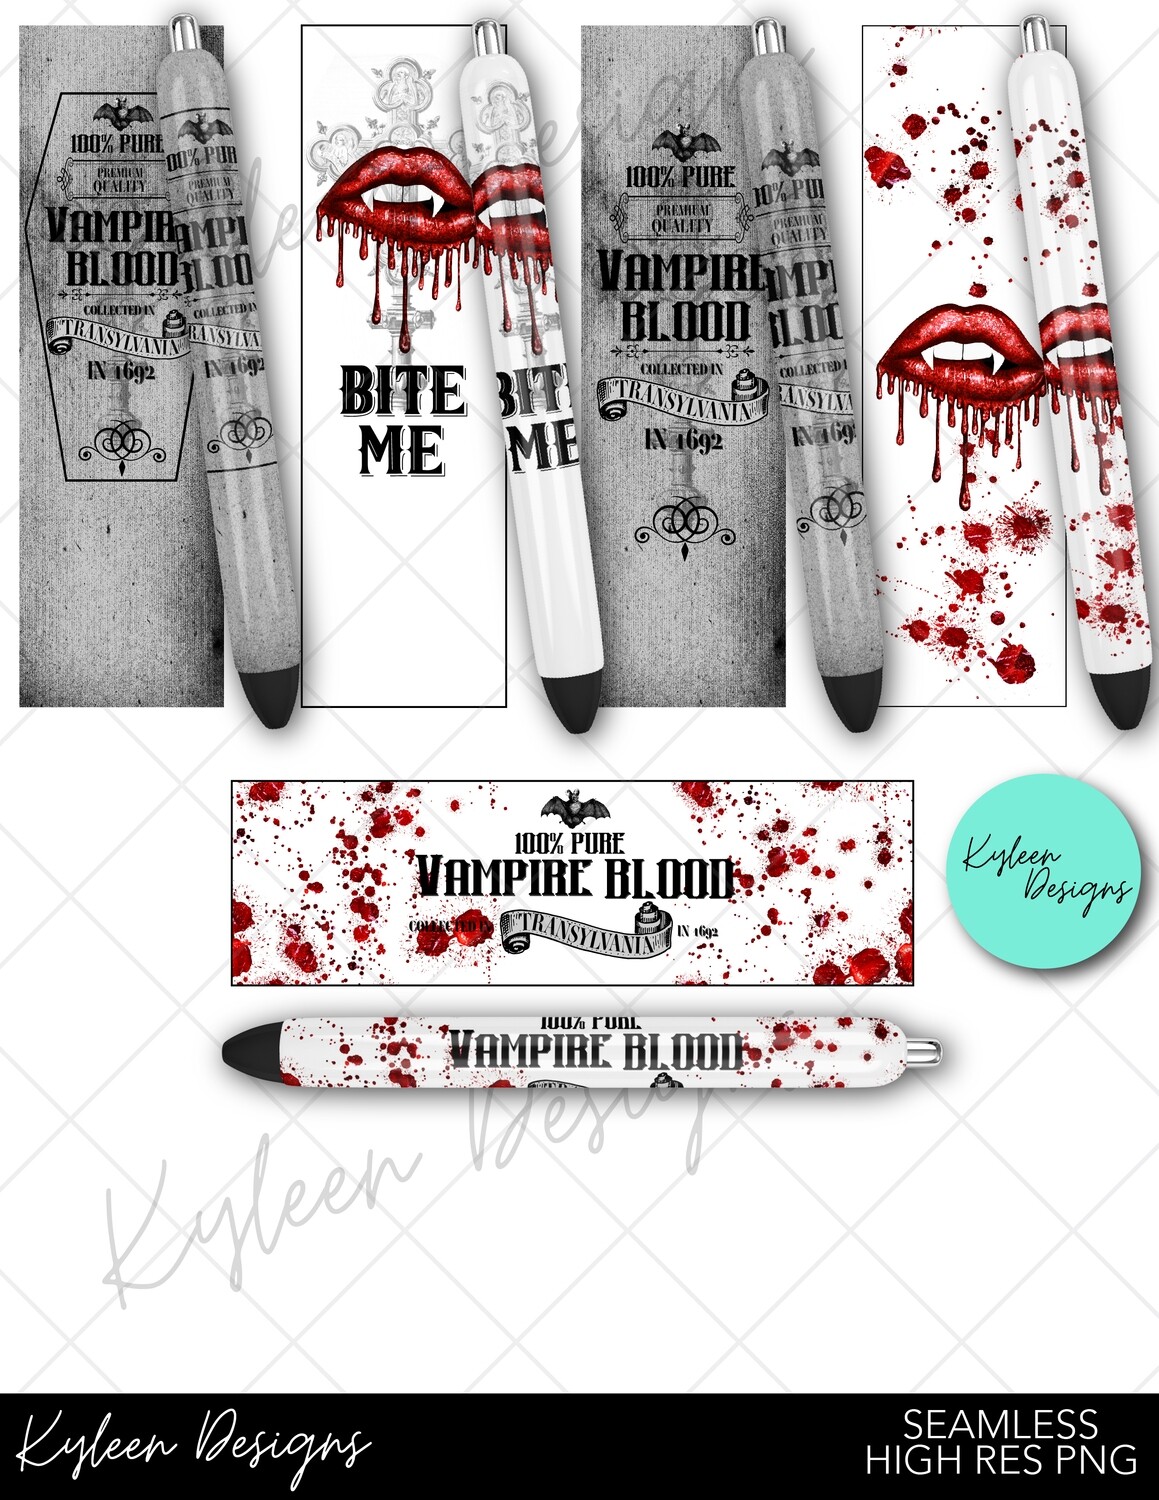 Seamless vampire blood Pen Wrappers™  for waterslide High Res PNG file